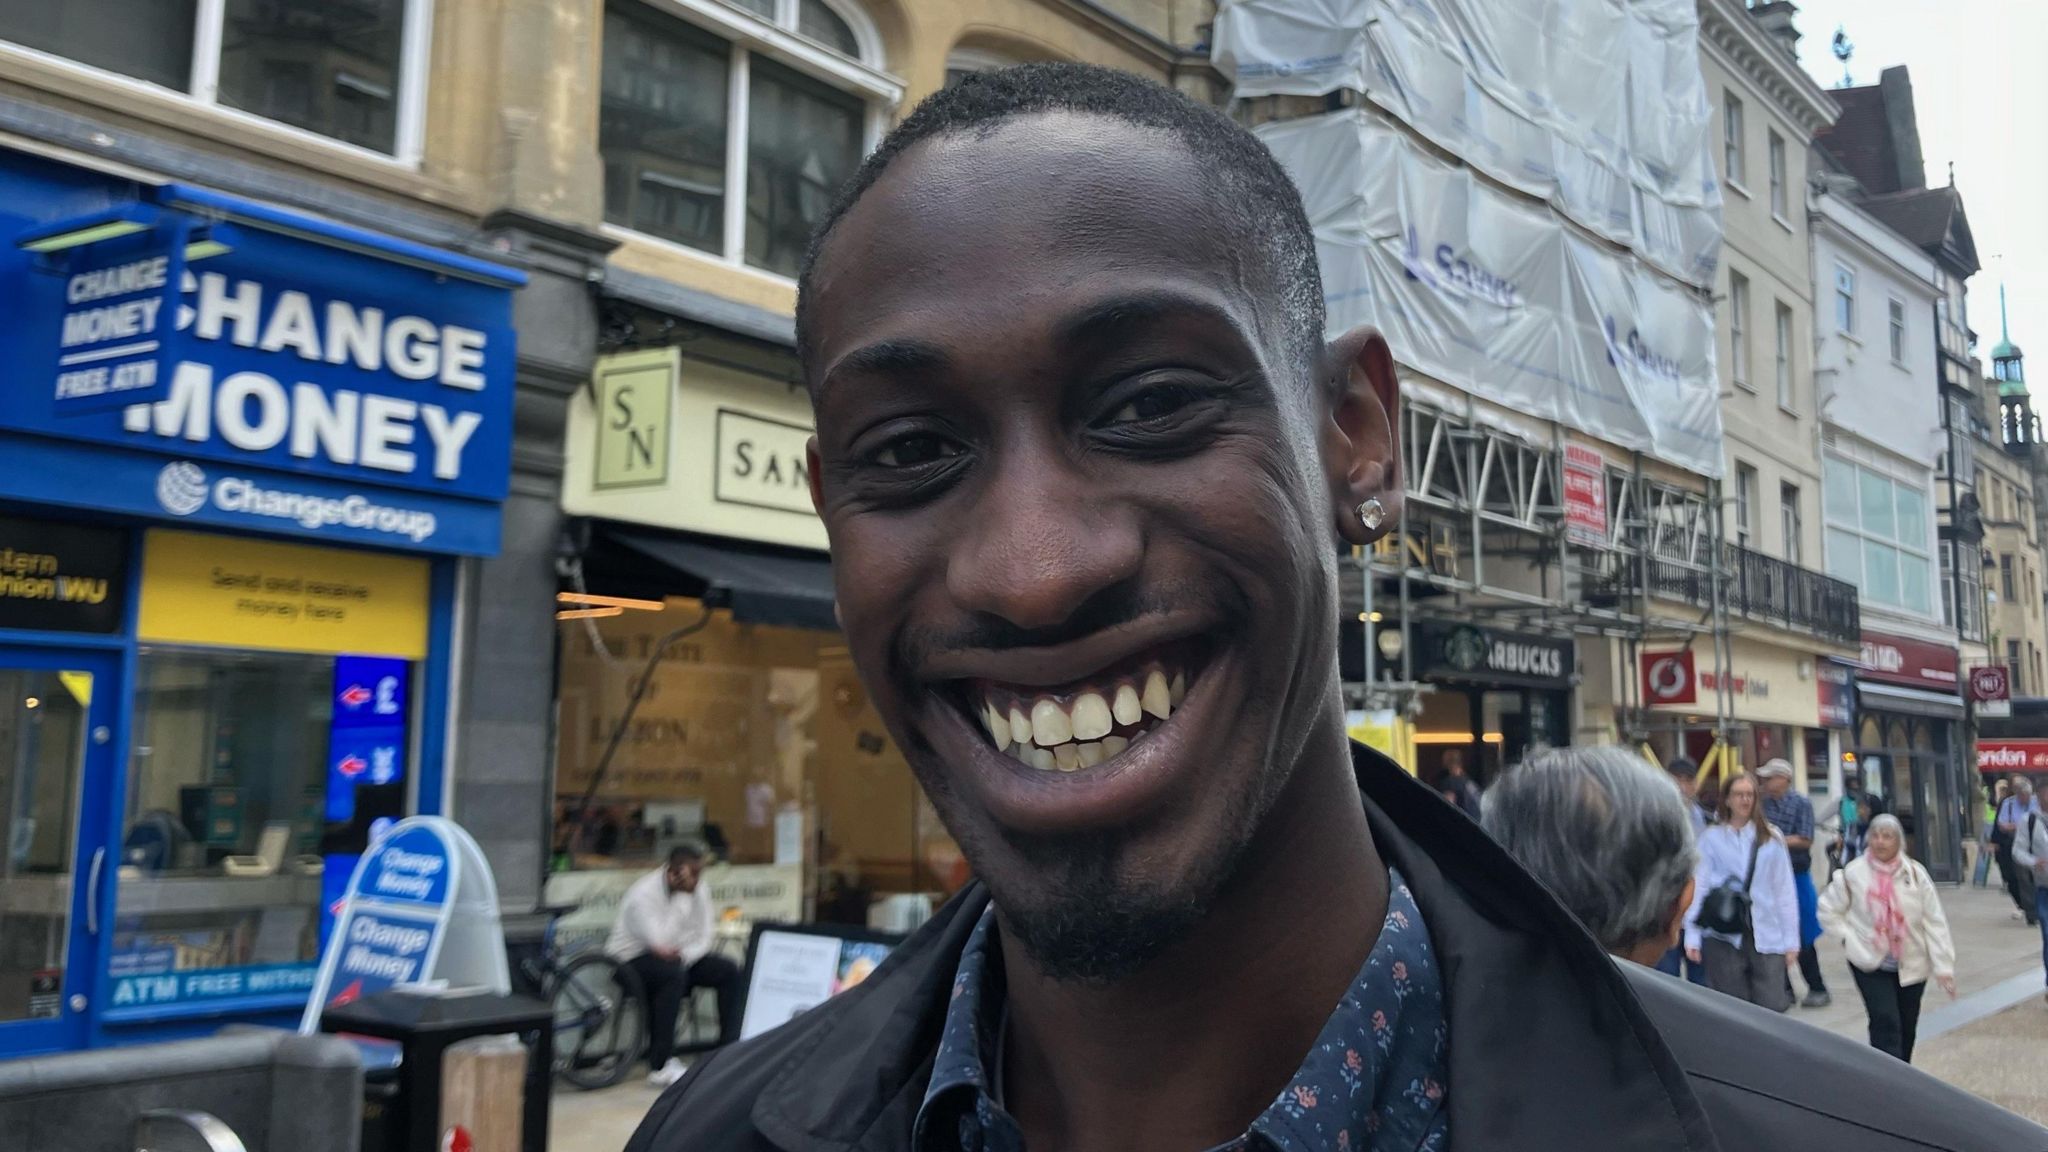 Samuel Ouyewusi is black and is smiling for the camera. He has a diamond earring in his left ear and is wearing a blue patterned shirt with a black coat 